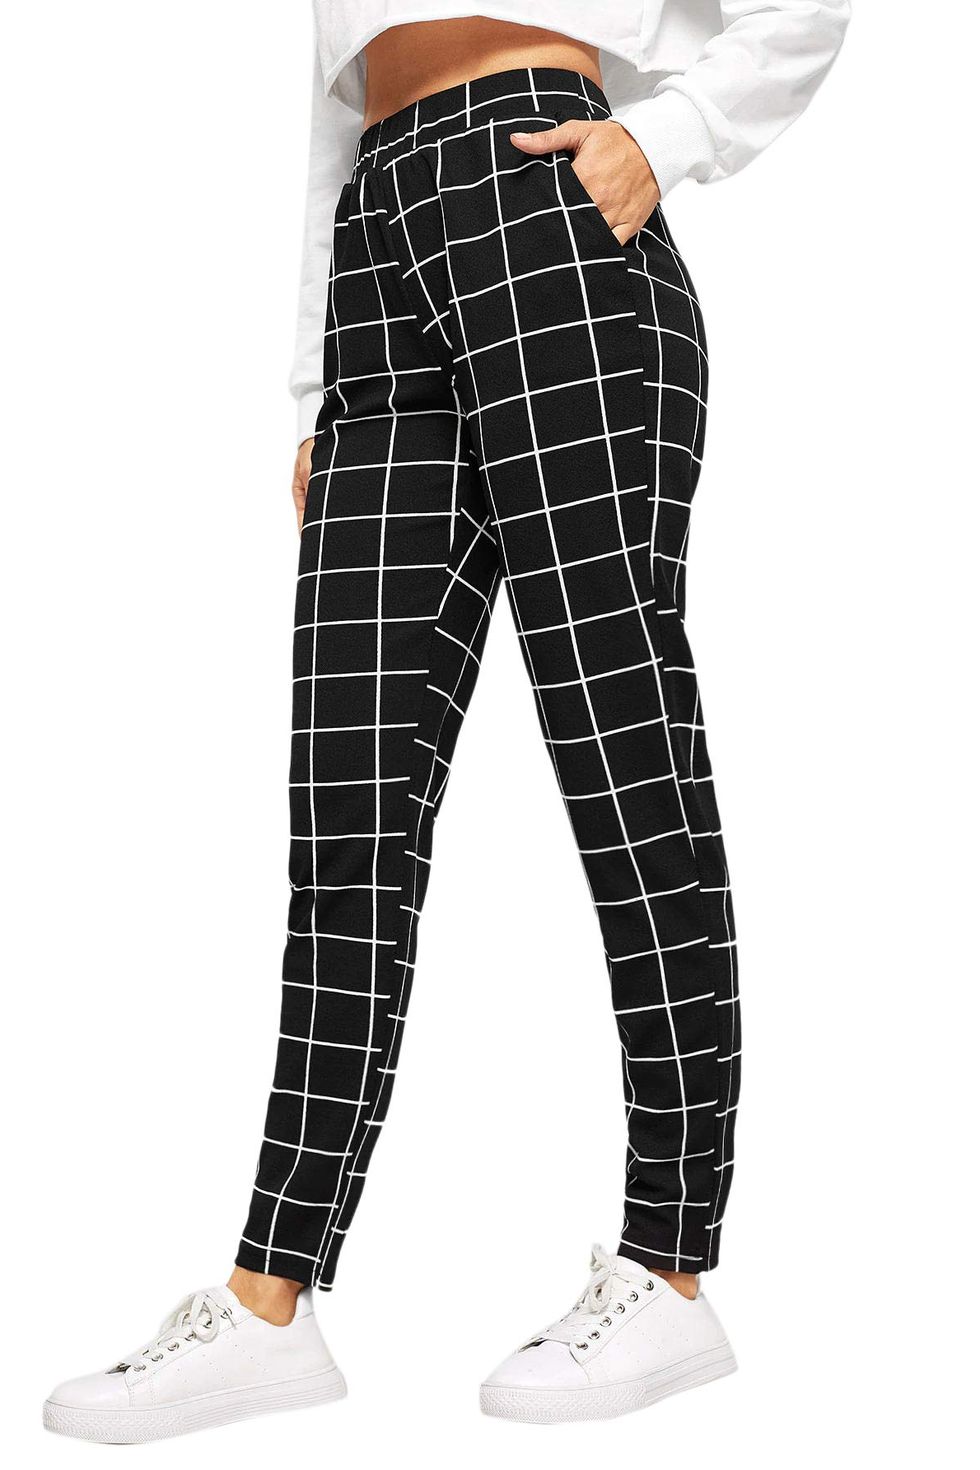 Express Editor Super High Waisted Plaid Straight Ankle Pant Multi-Color  Women's 14 Long